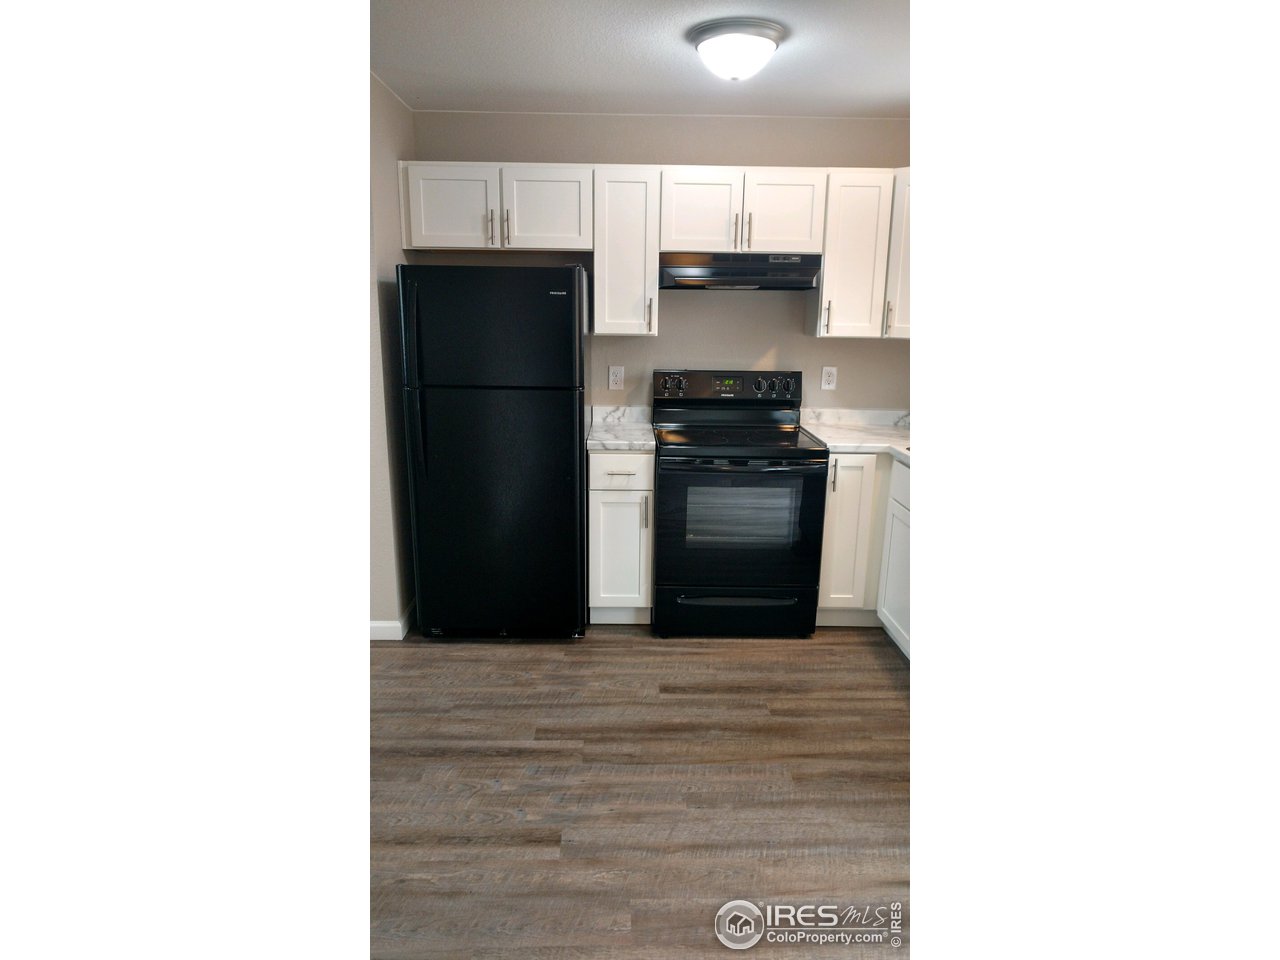 New Range/Oven and New Refrigerator